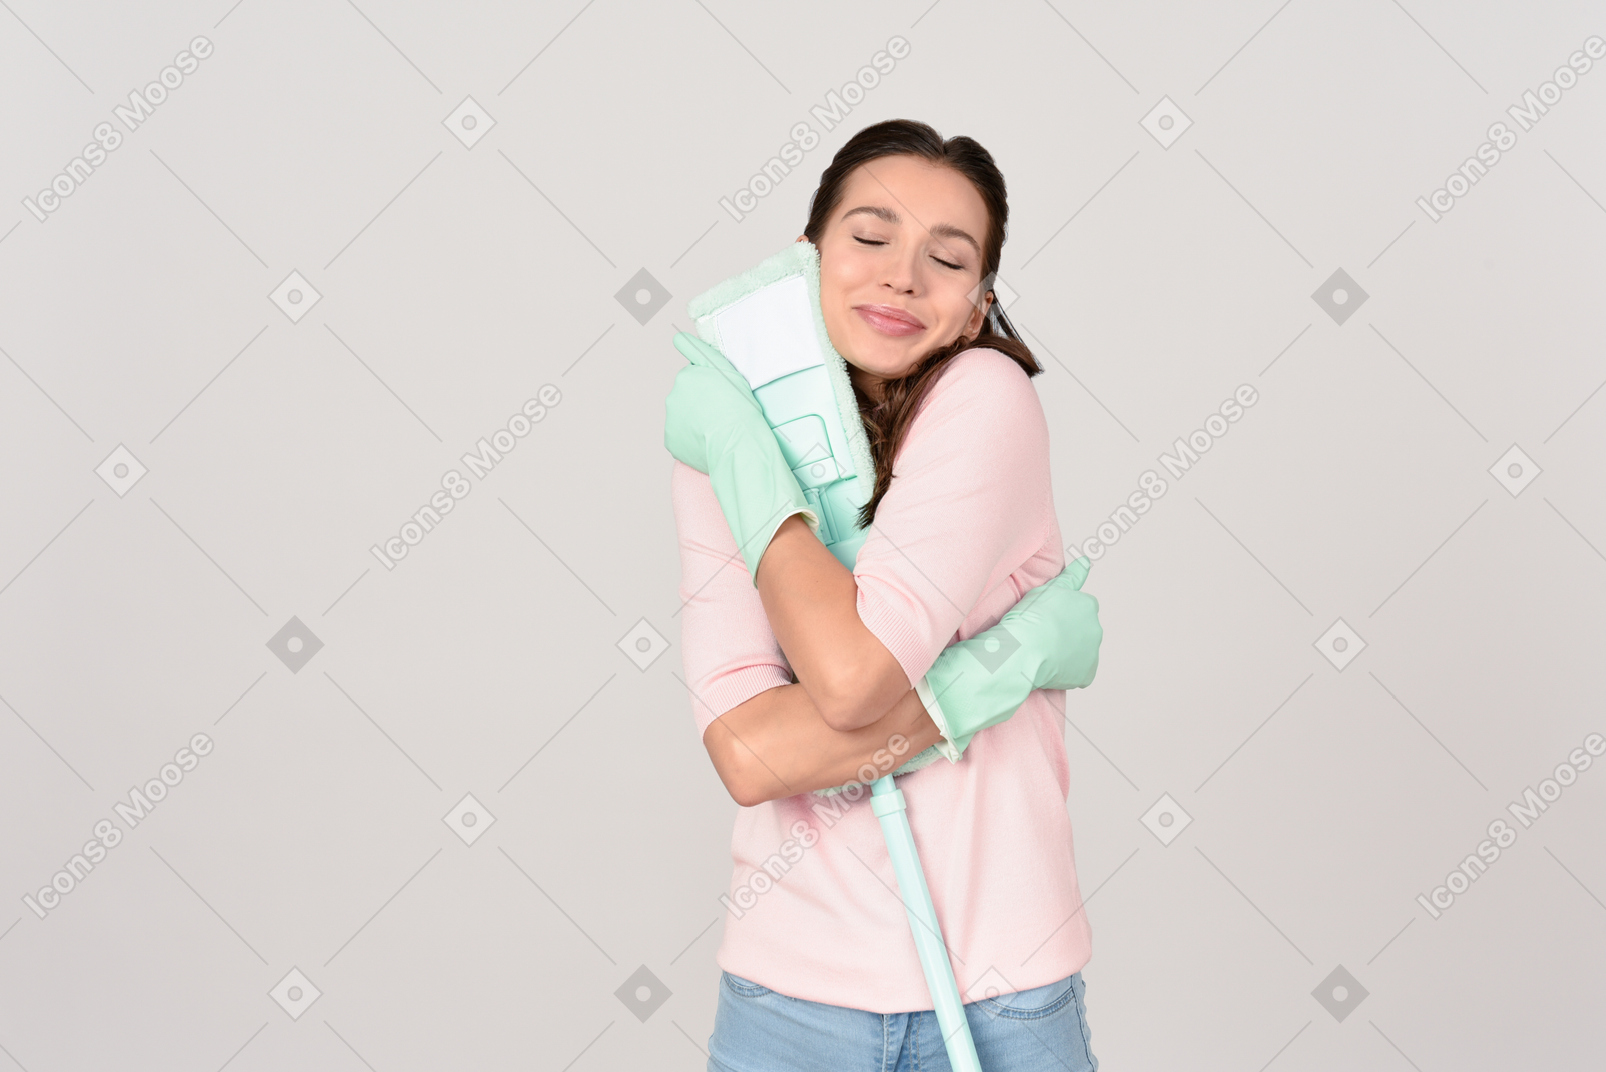 Attractive young woman pleased with her mop